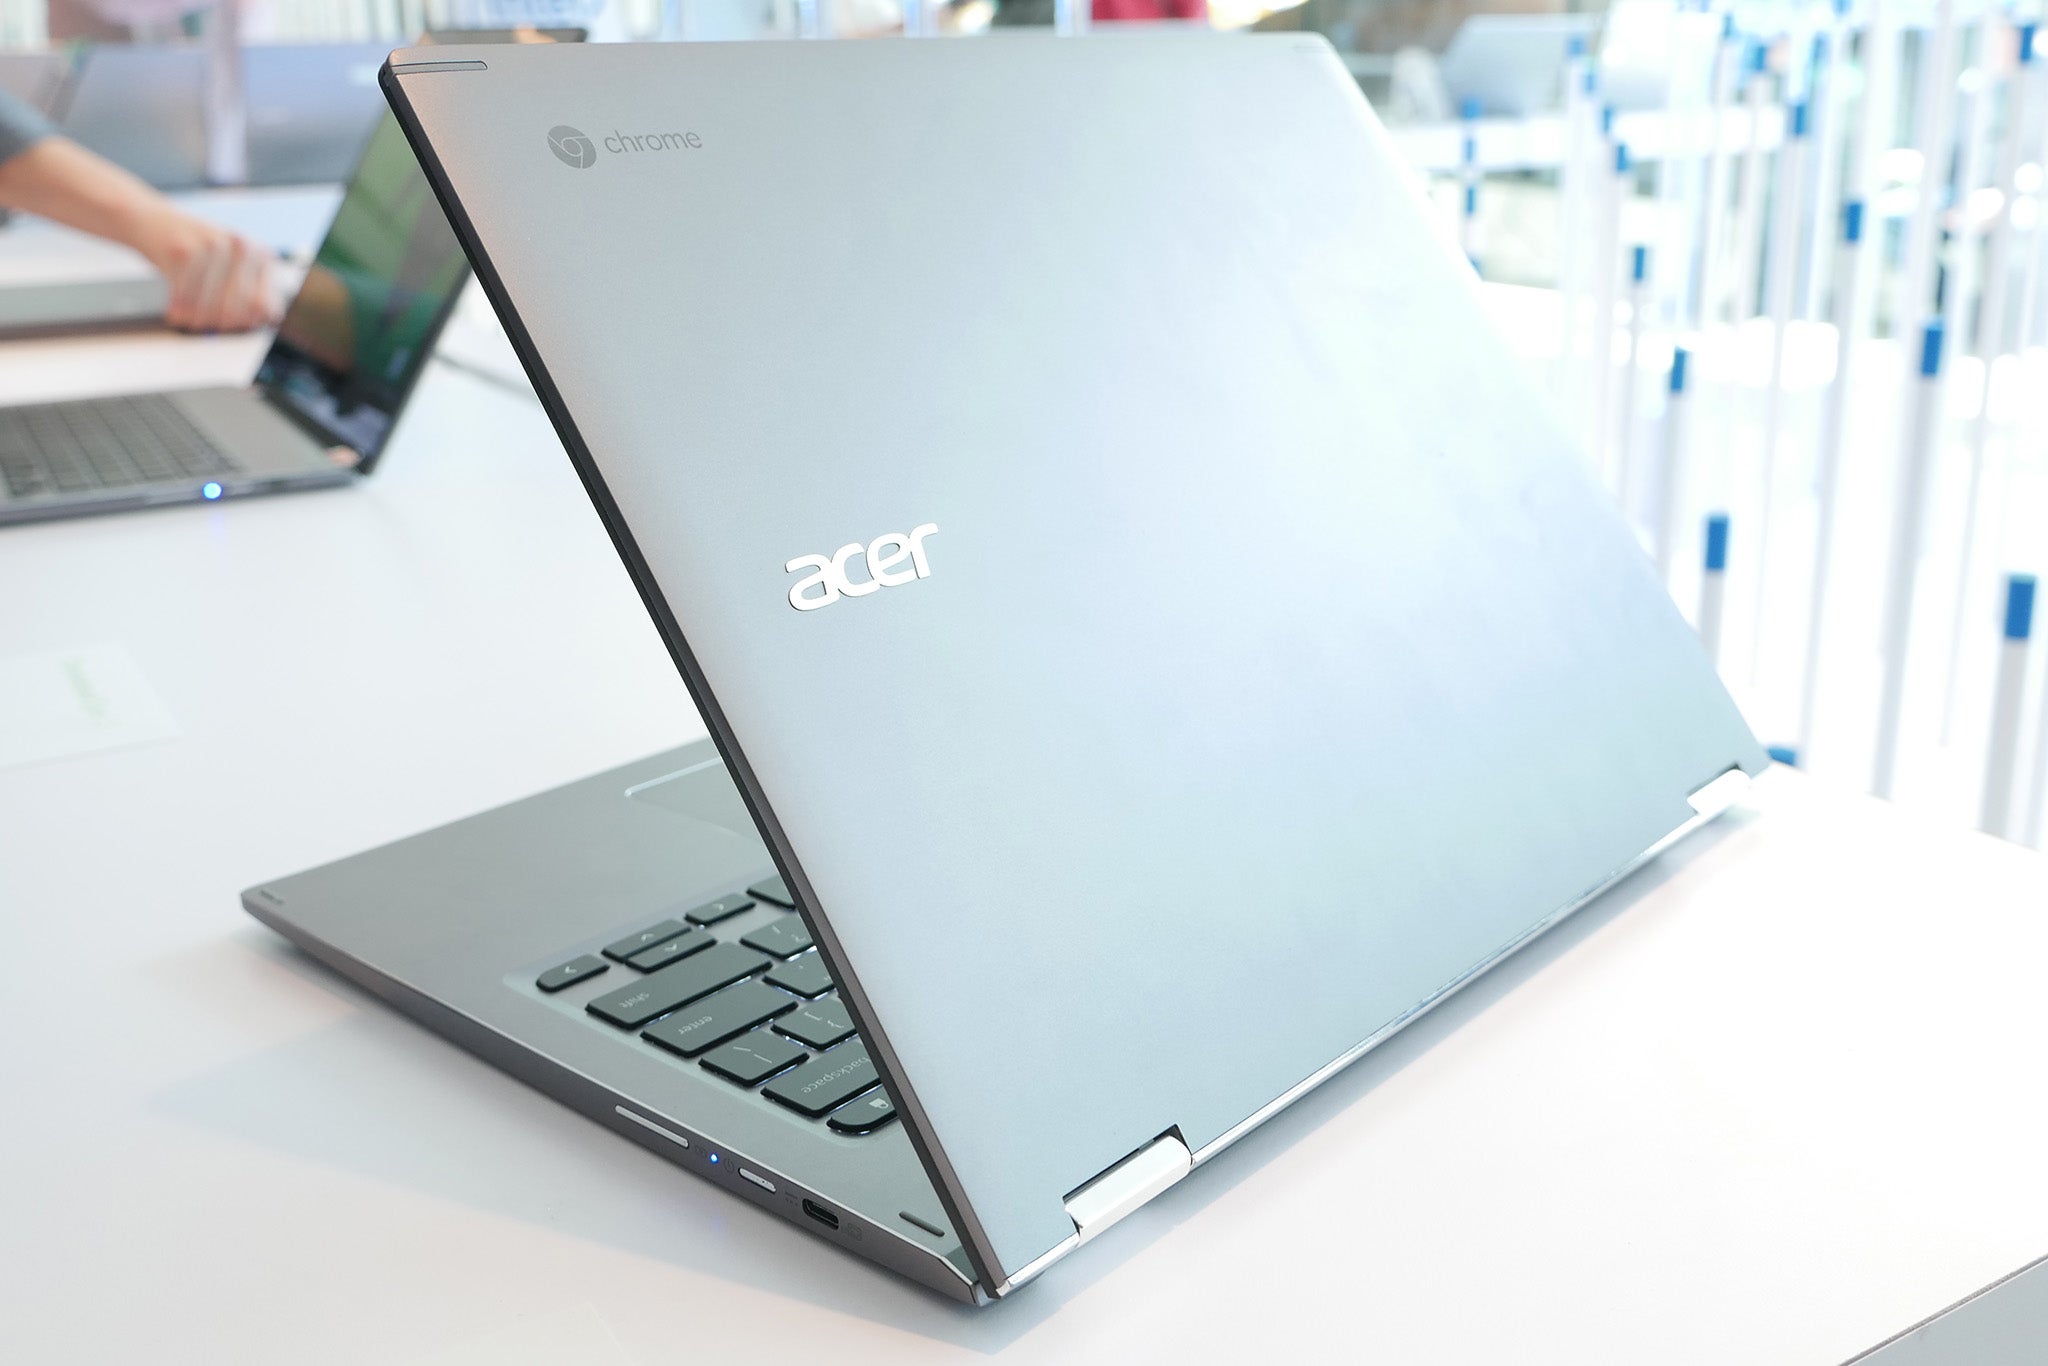 Acer Chromebook Spin 13 in tent mode on a desk.